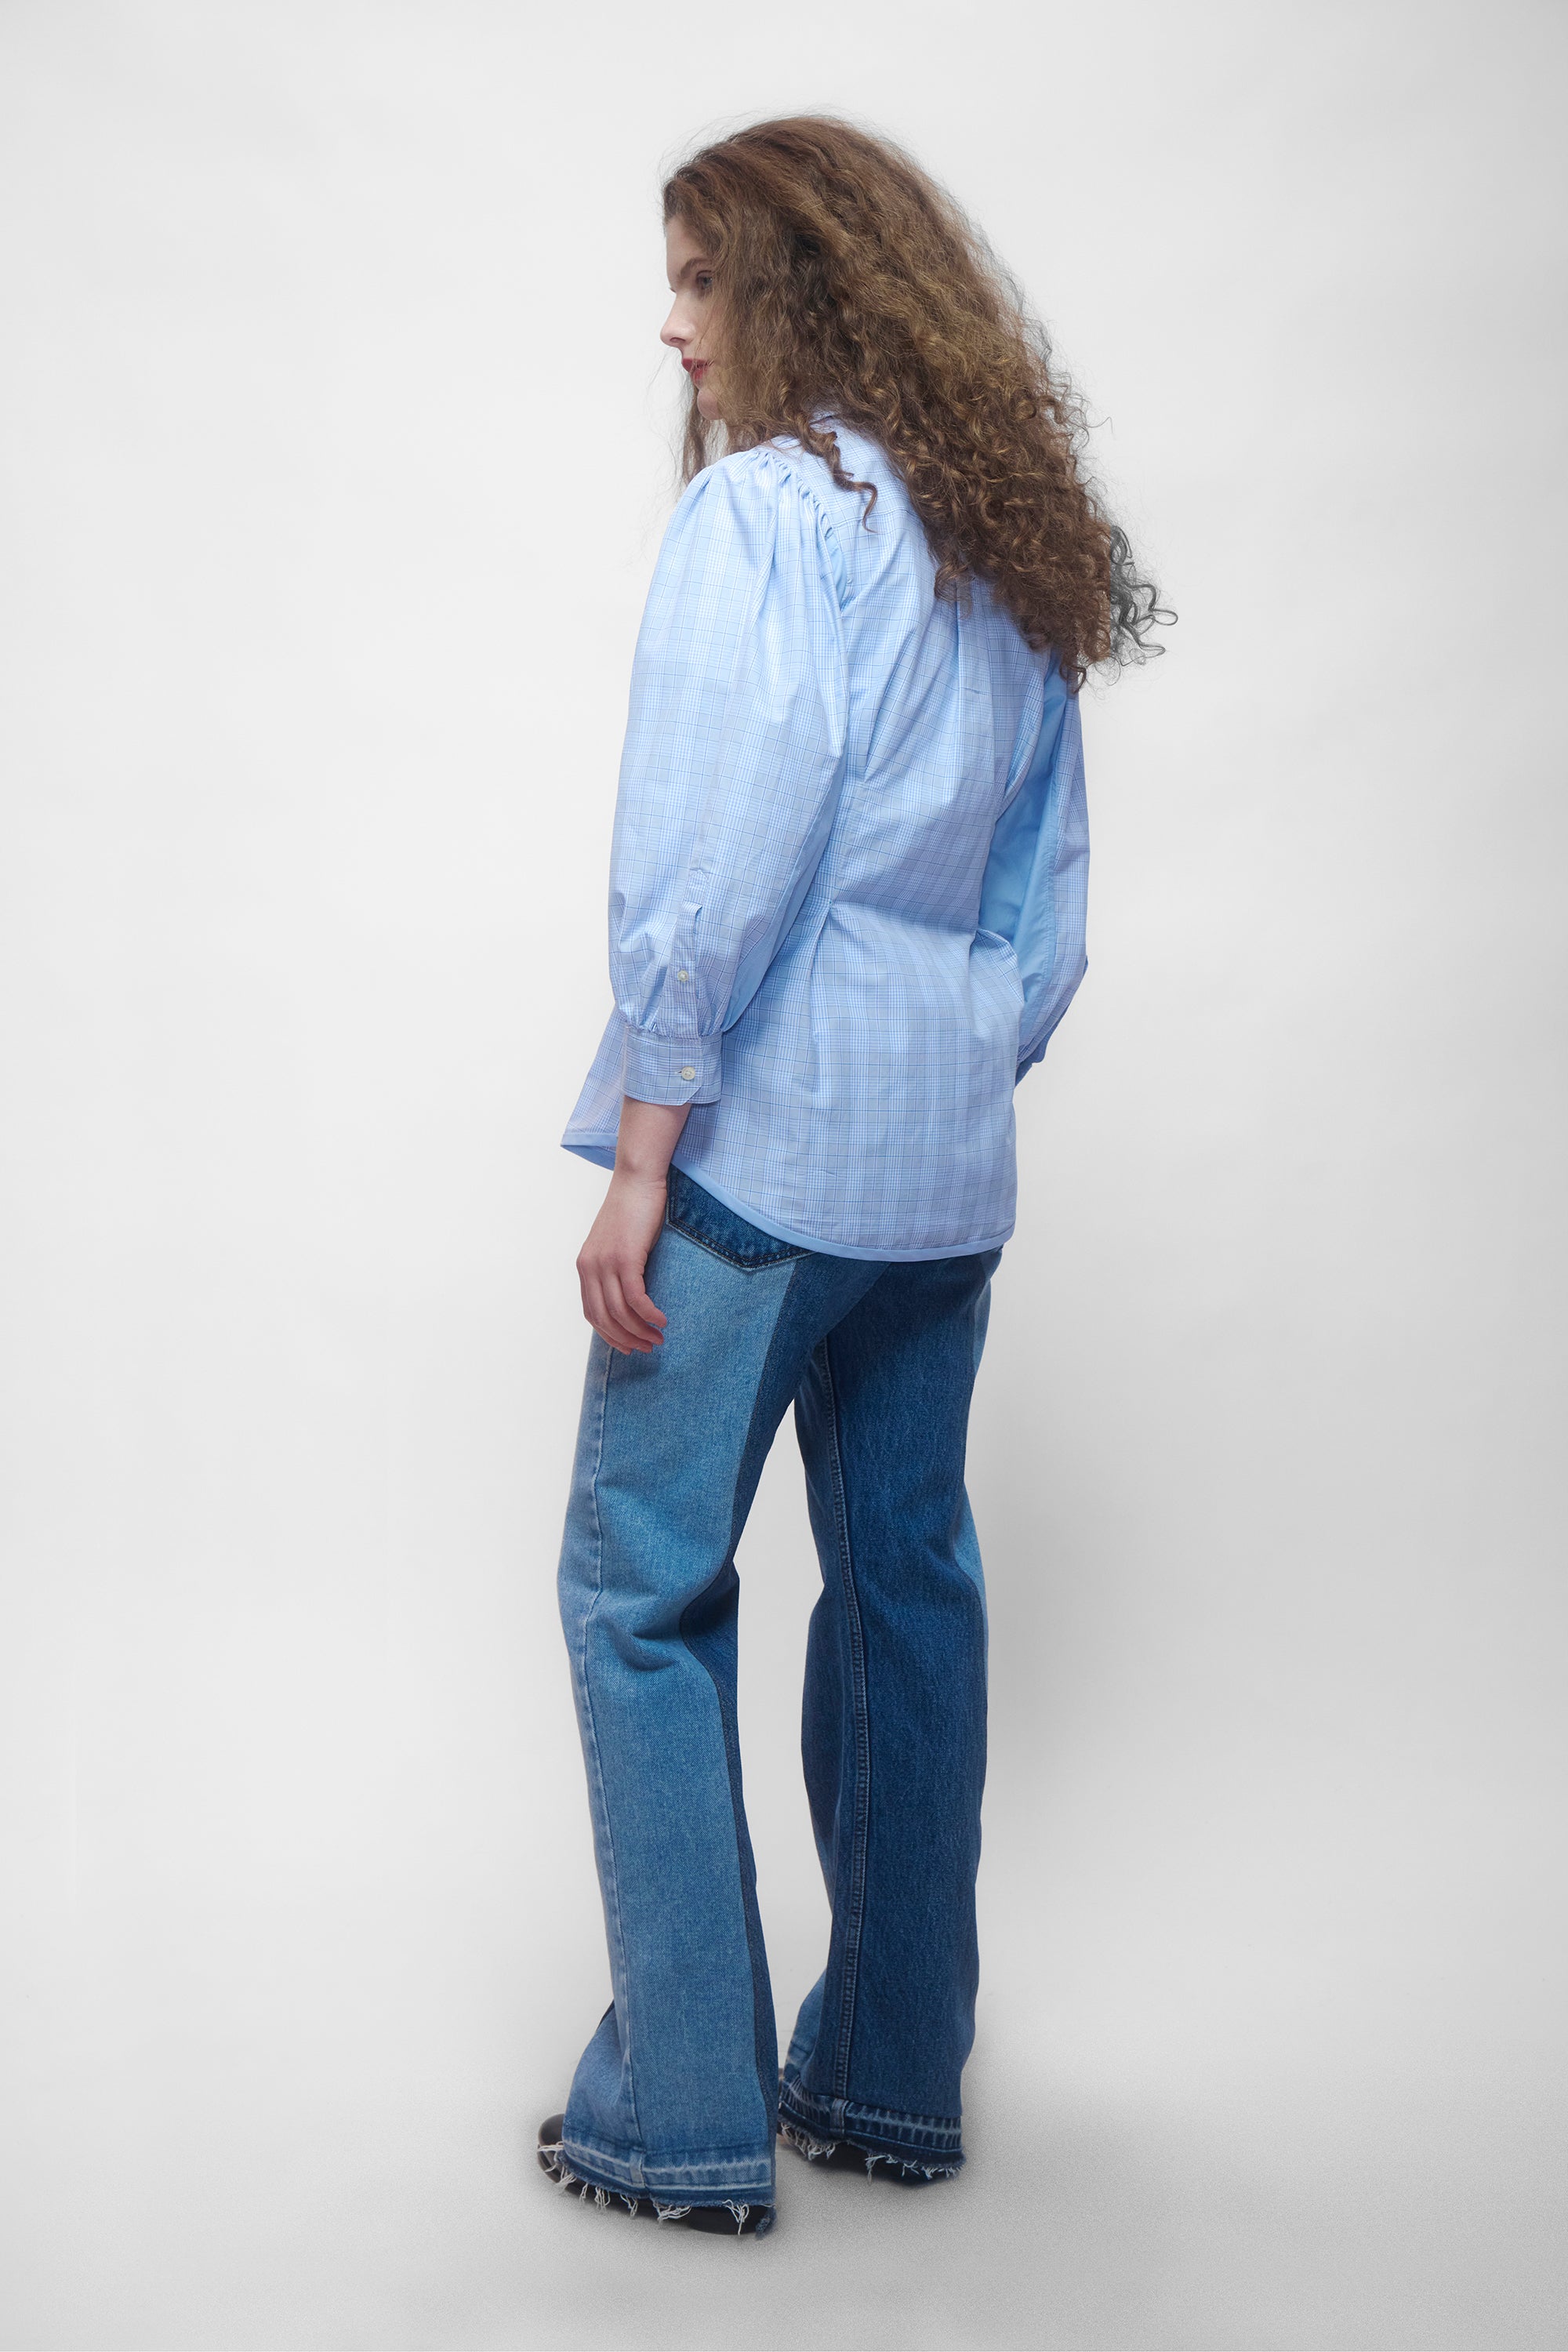 ANOMIE BLOUSE IN BLUE CHECK